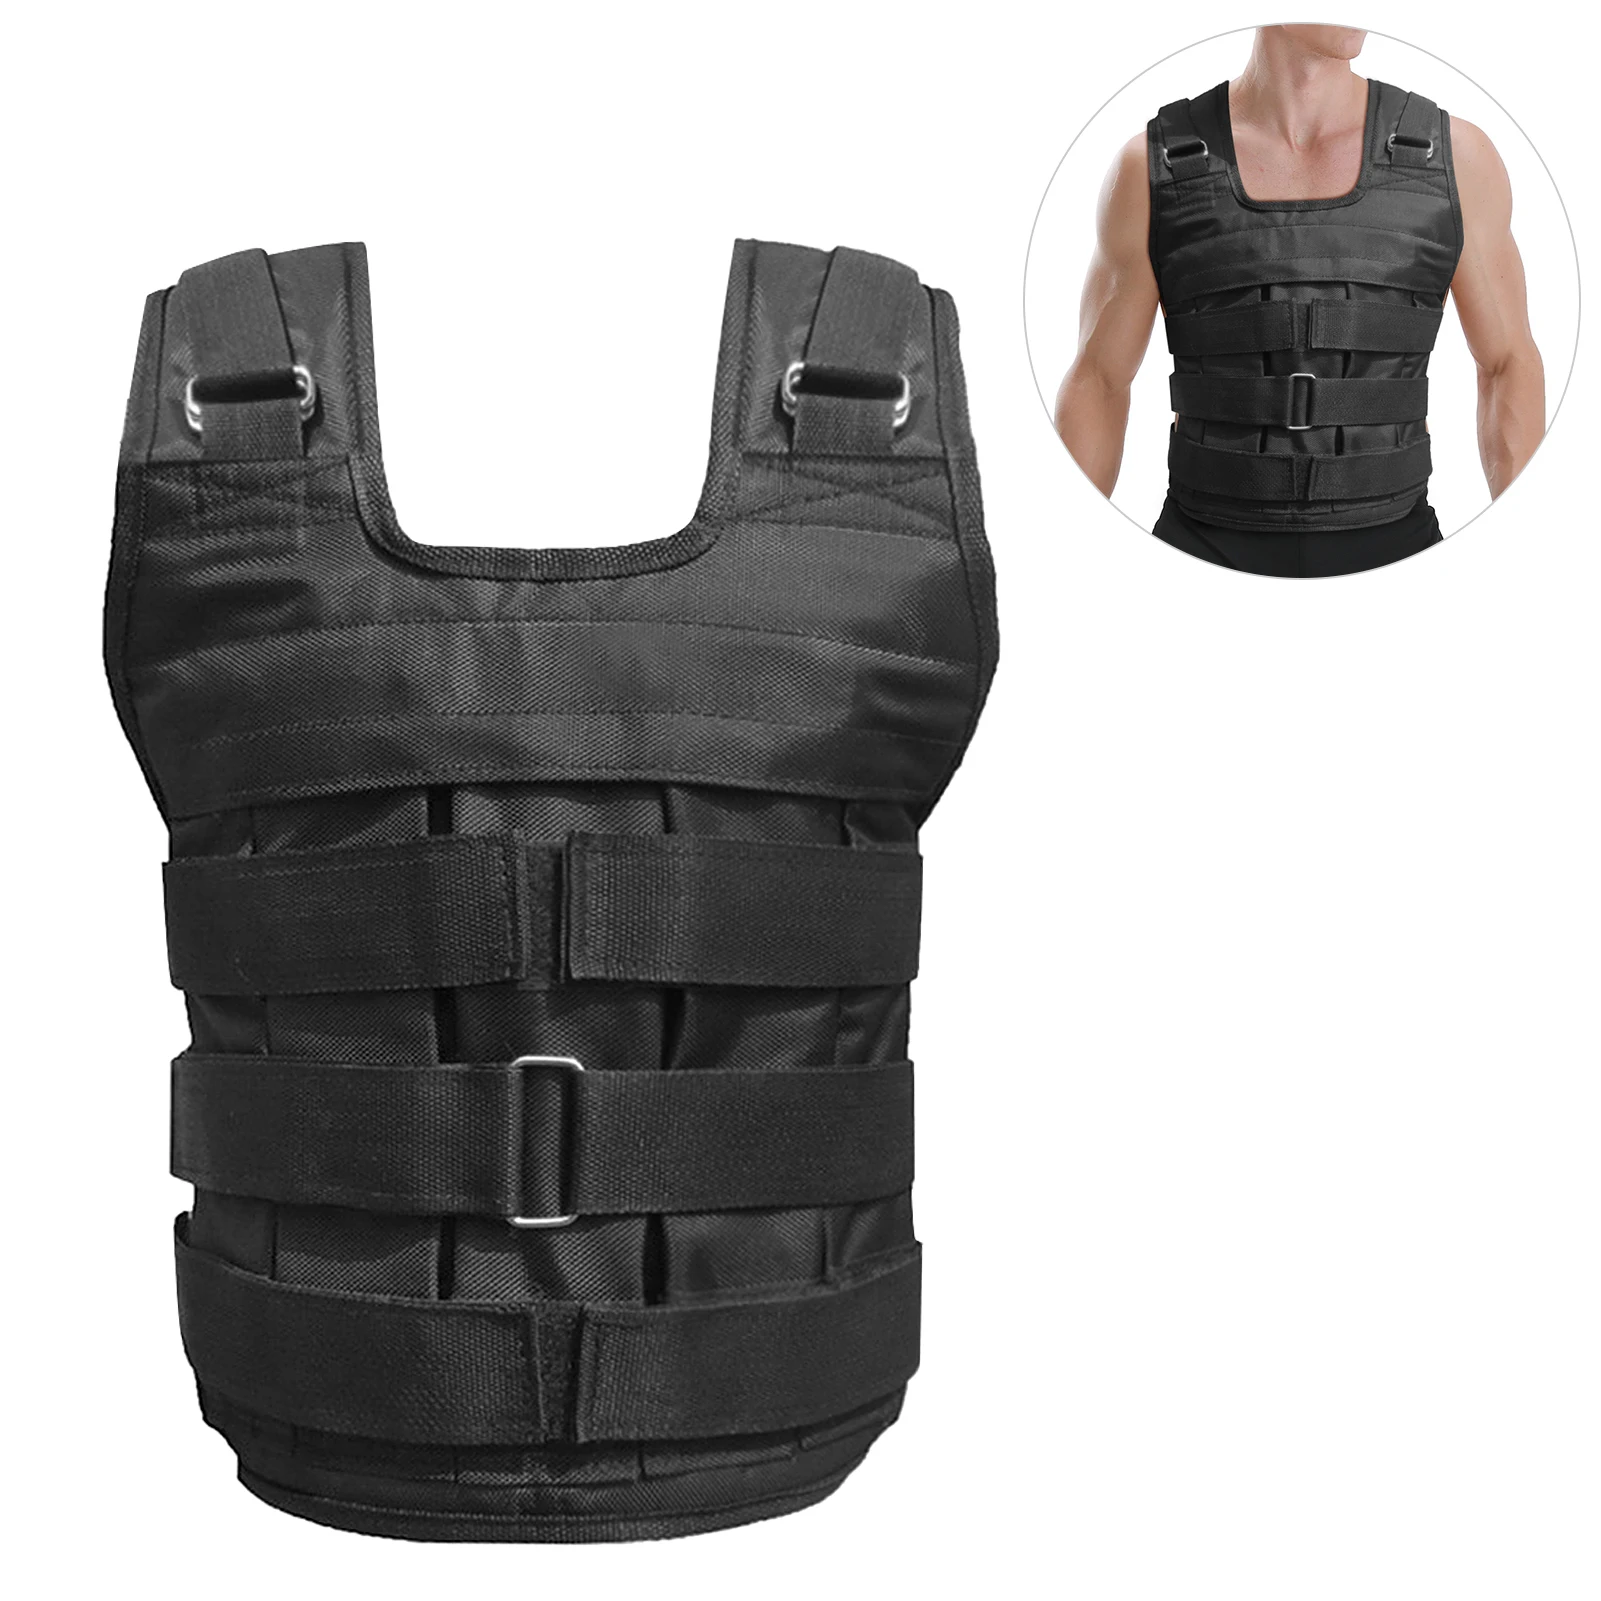 

Max Loading 50kg Adjustable Weighted Vest Weight Jacket Oxford Exercise Weight Loading Cloth Strength Training (Empty)